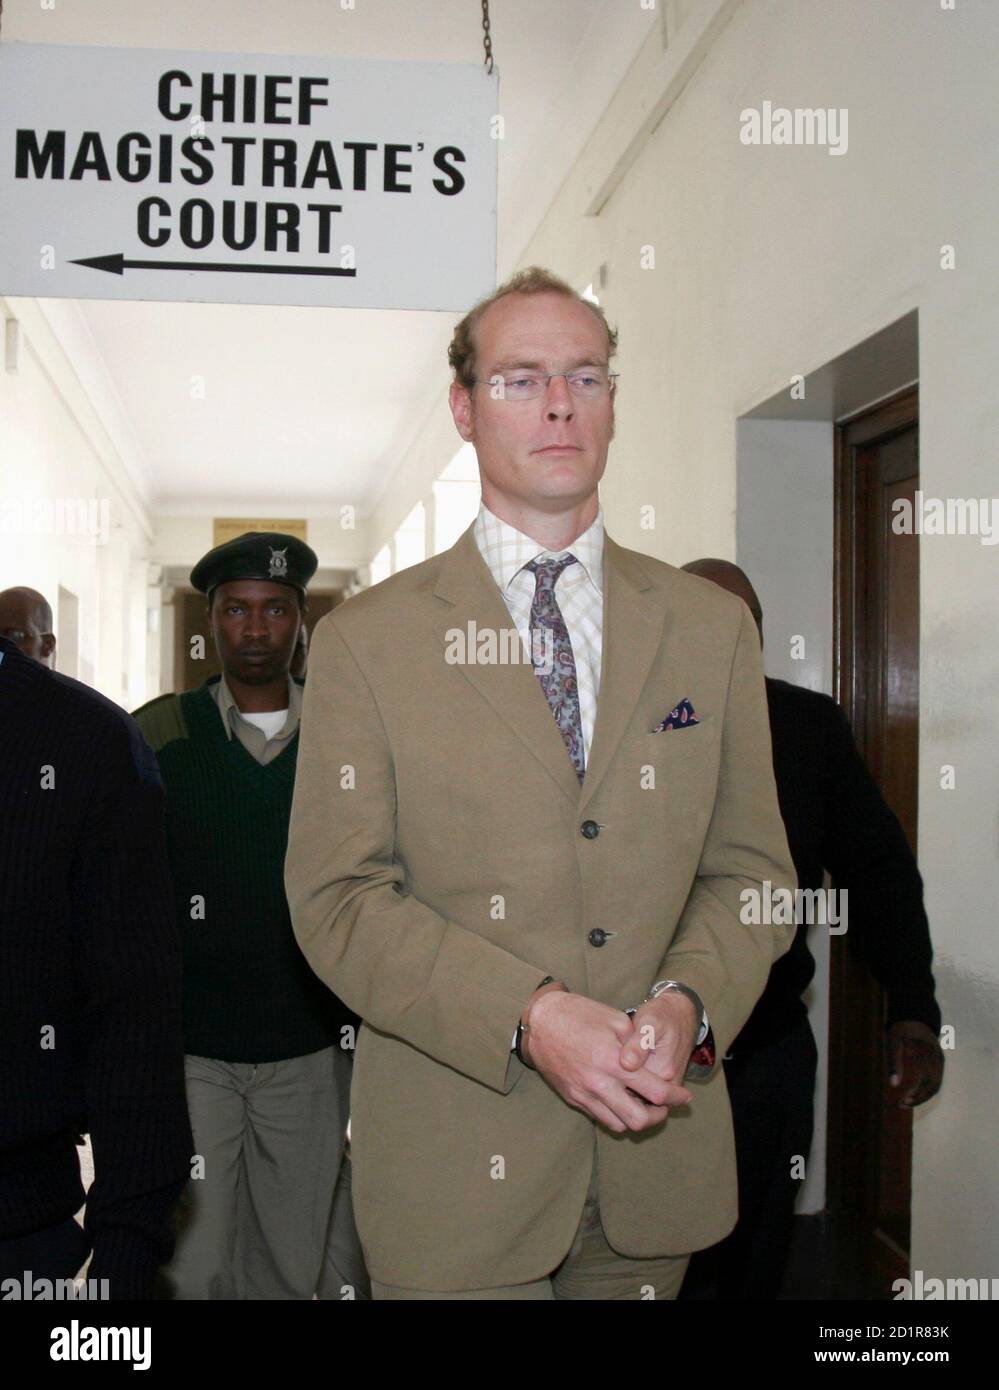 Thomas Cholmondeley arrives for his trial at the Nairobi law court July 27, 2007. A Kenyan court ruled on Wednesday that Cholmondeley, descendant of one of the country's most famous white settlers, should present his defence in a murder case that has stoked longstanding racial tensions. REUTERS/Thomas Mukoya (KENYA) Stock Photo